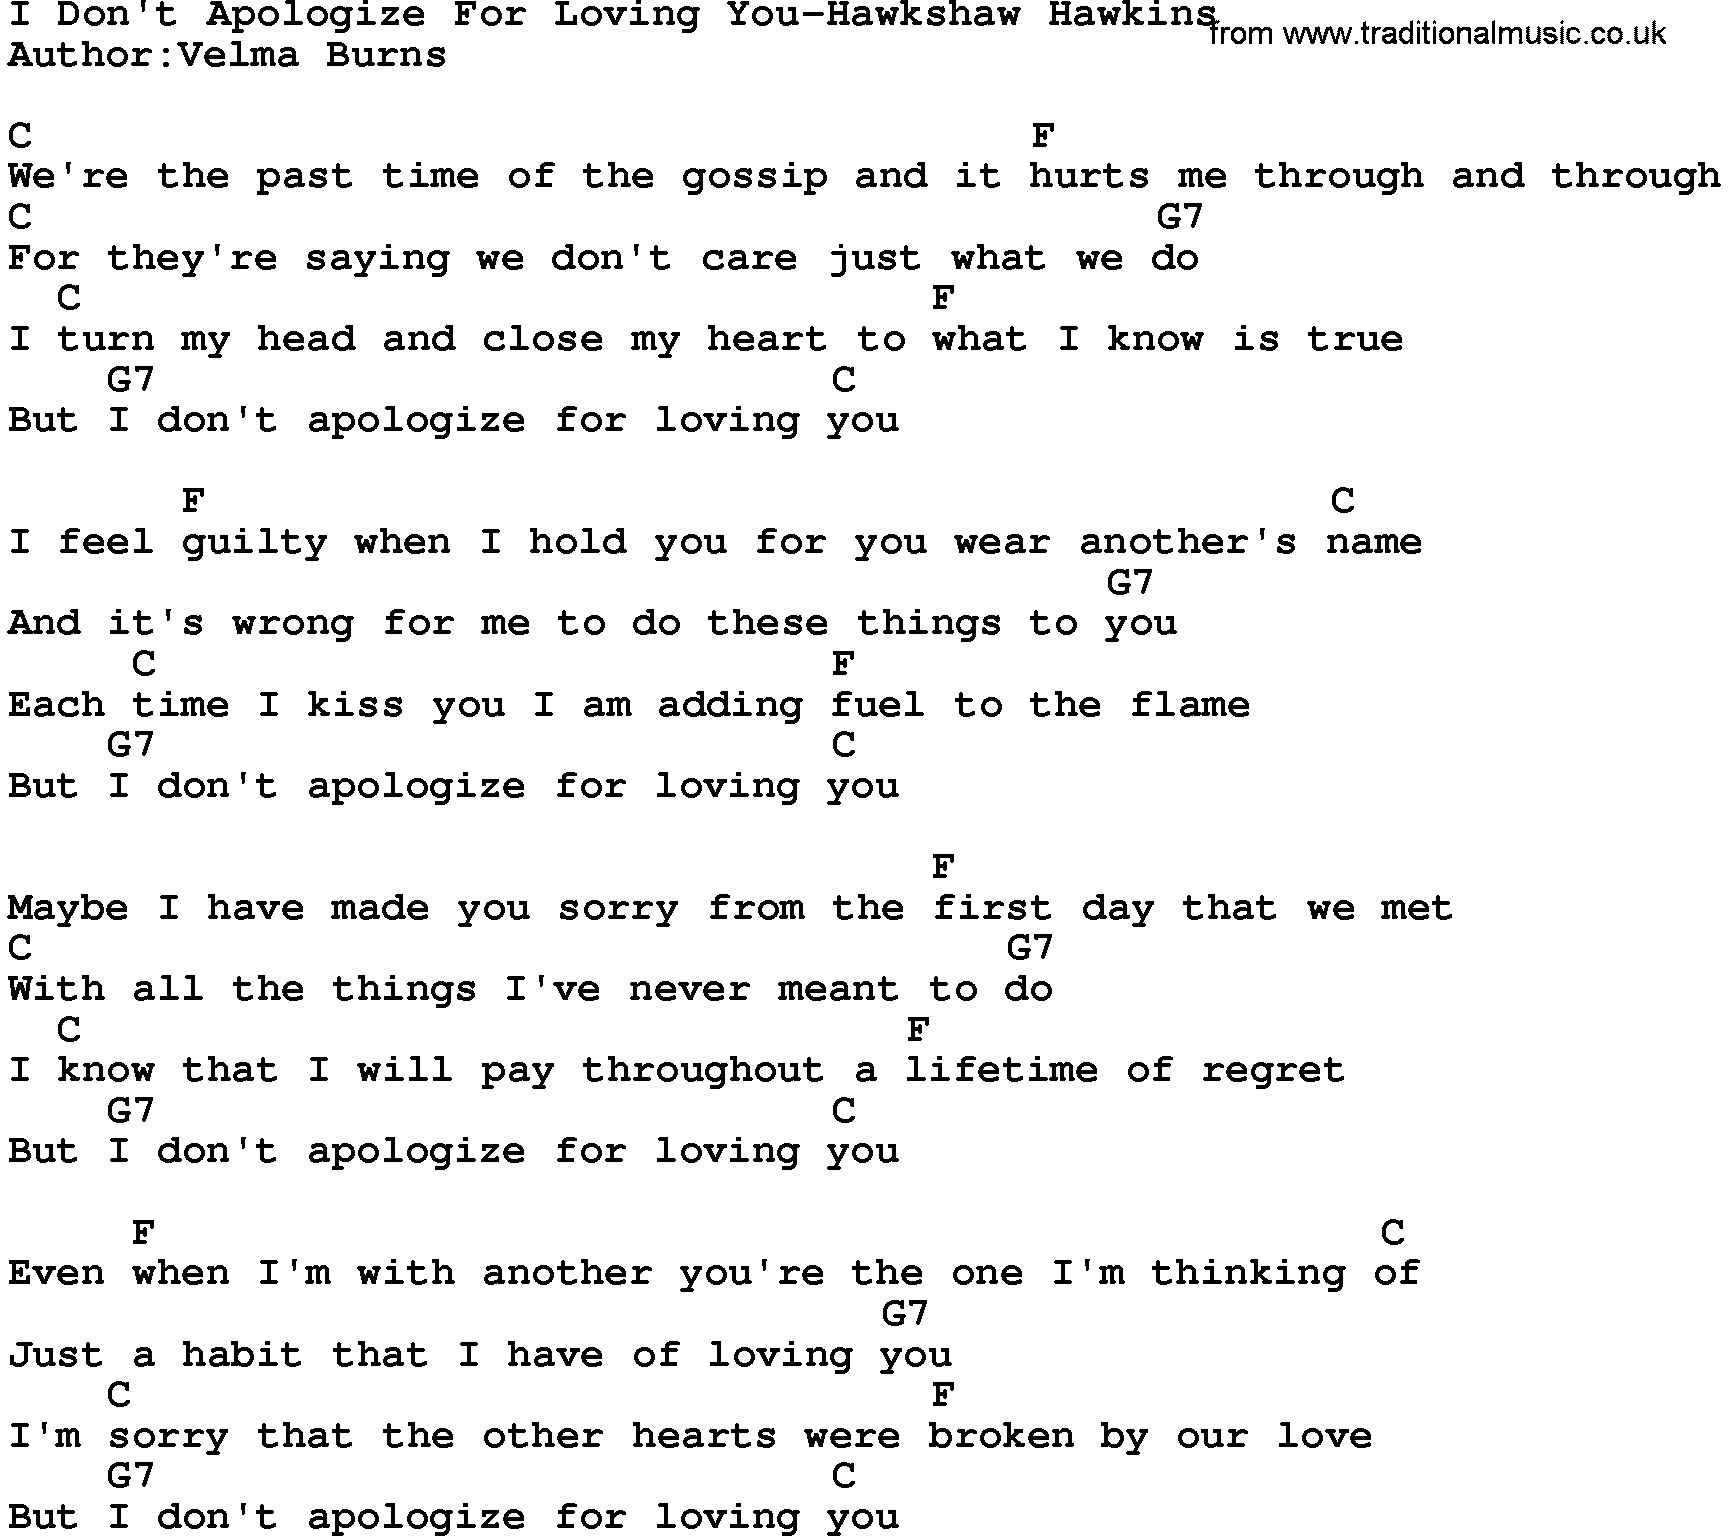 Country music song: I Don't Apologize For Loving You-Hawkshaw Hawkins lyrics and chords